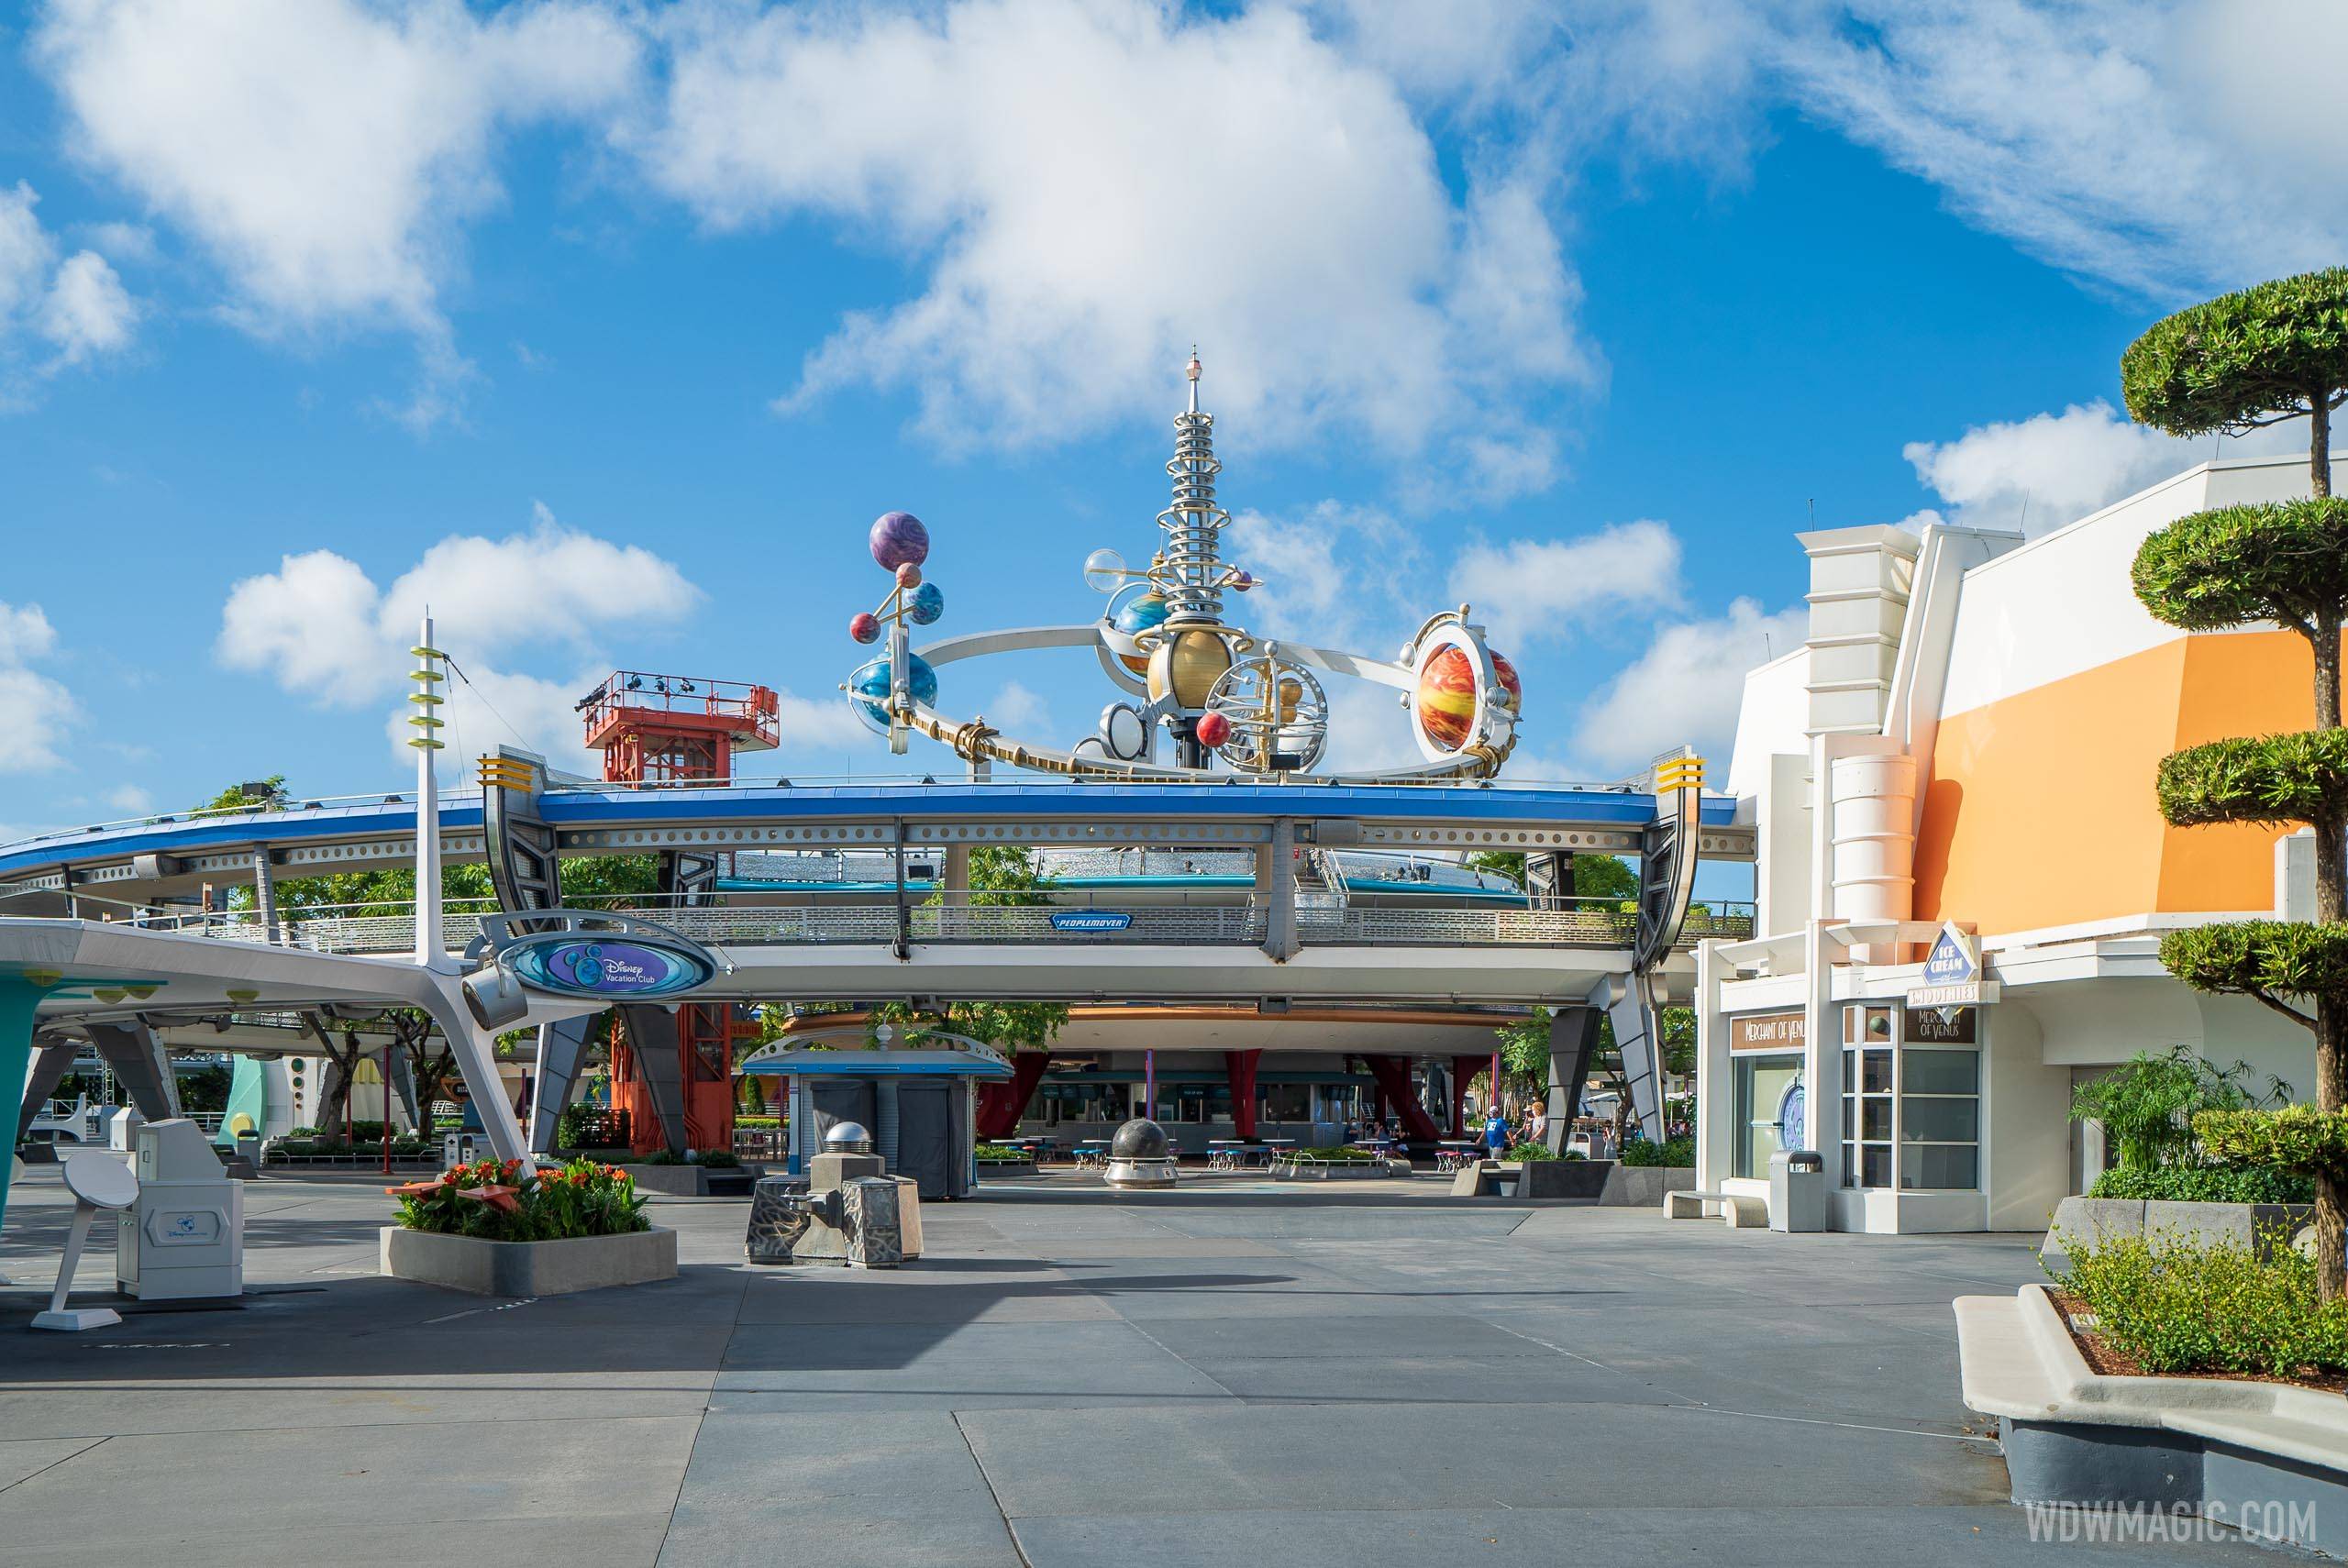 Tommorowland Transit Authority PeopleMover closed - July 2020